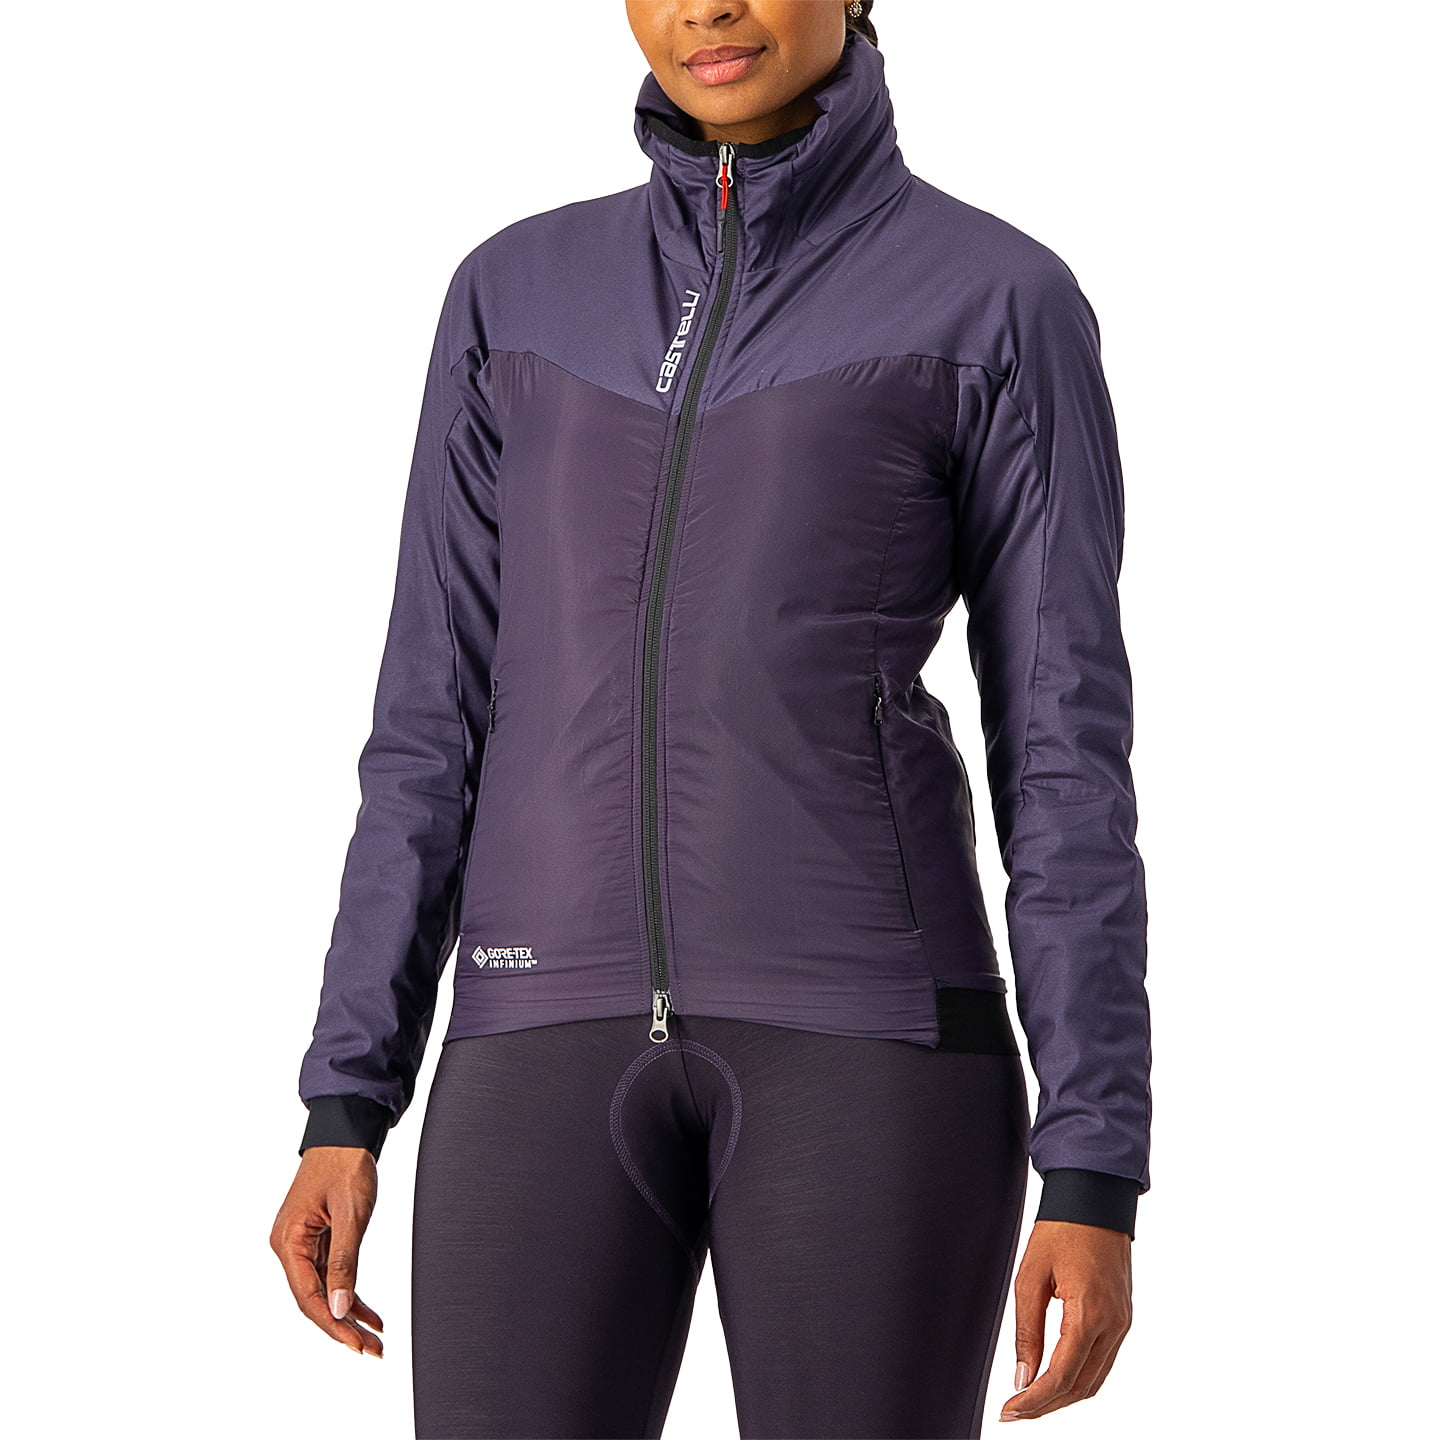 Women’s winter jacket Fly Thermal Women’s Thermal Jacket, size M, Cycle jacket, Cycling clothing